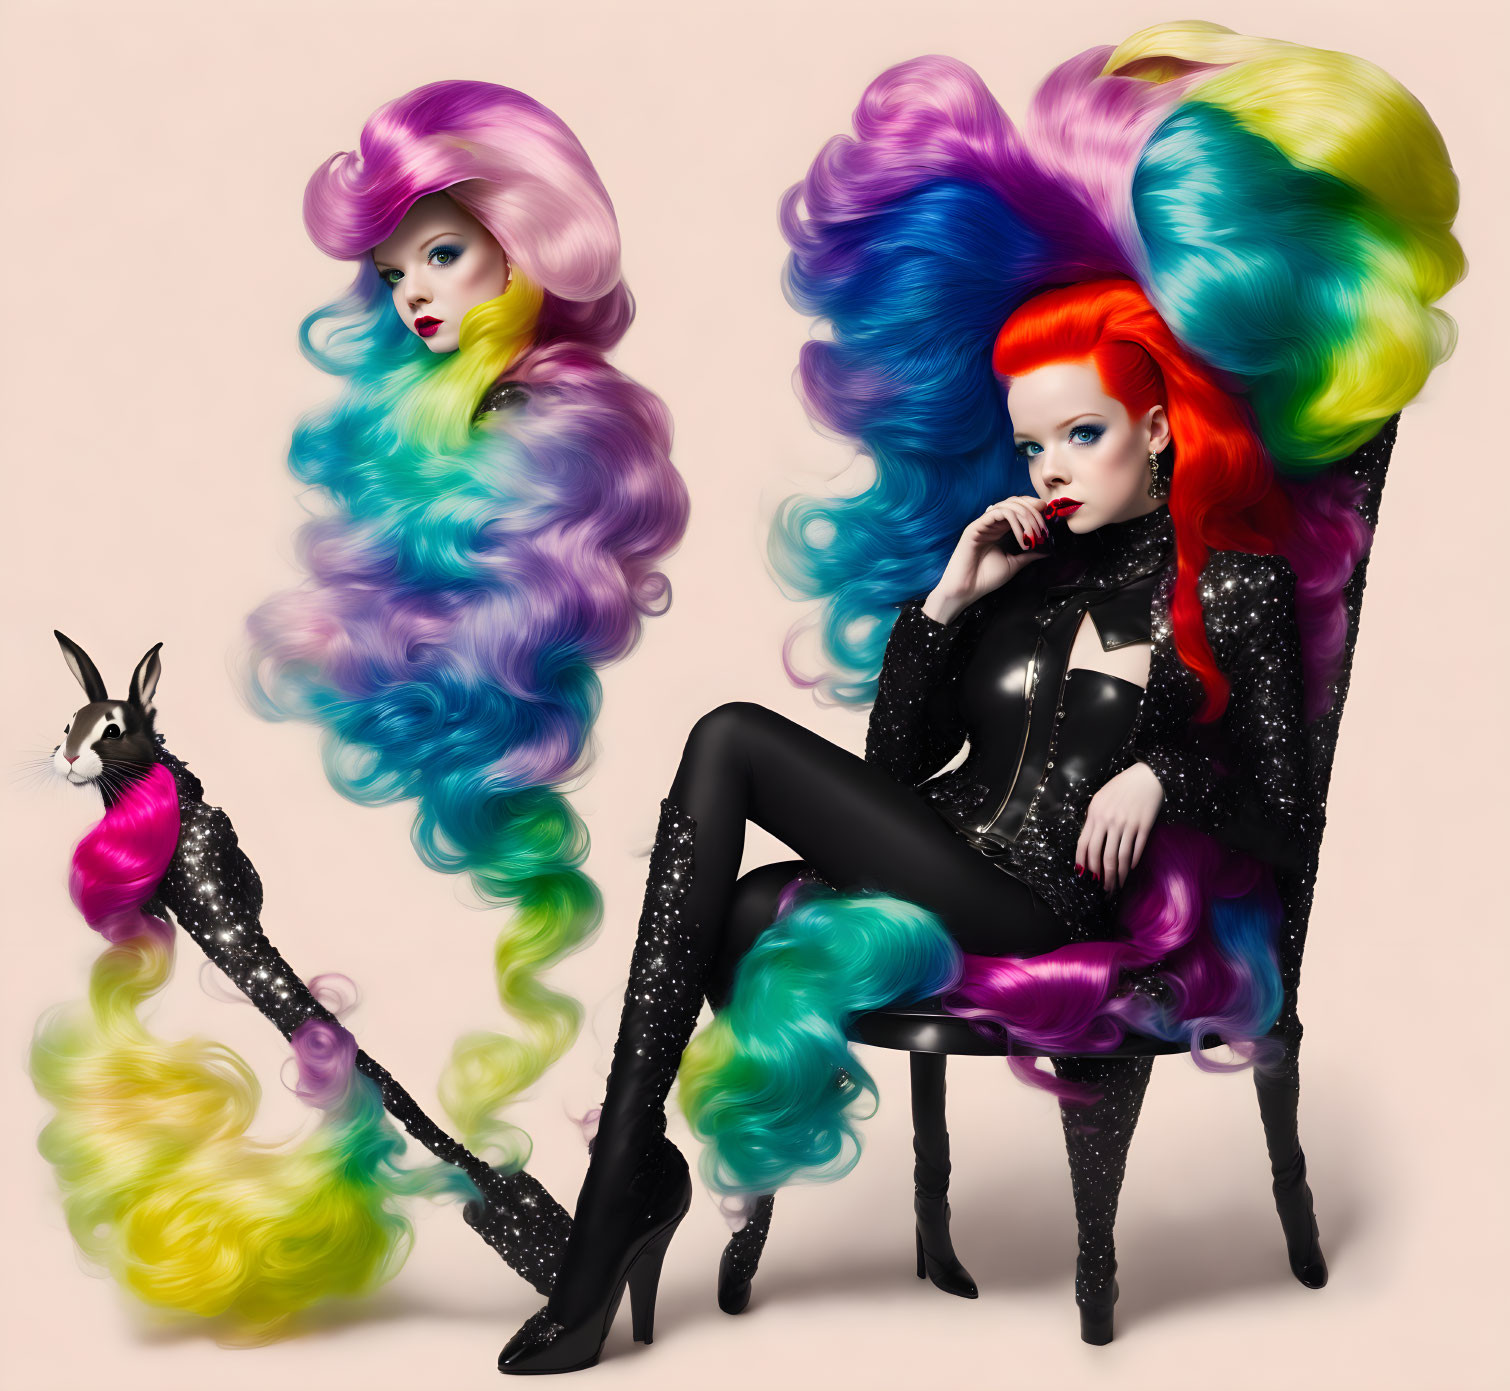 Stylized women with colorful hair and llama in sparkling outfits